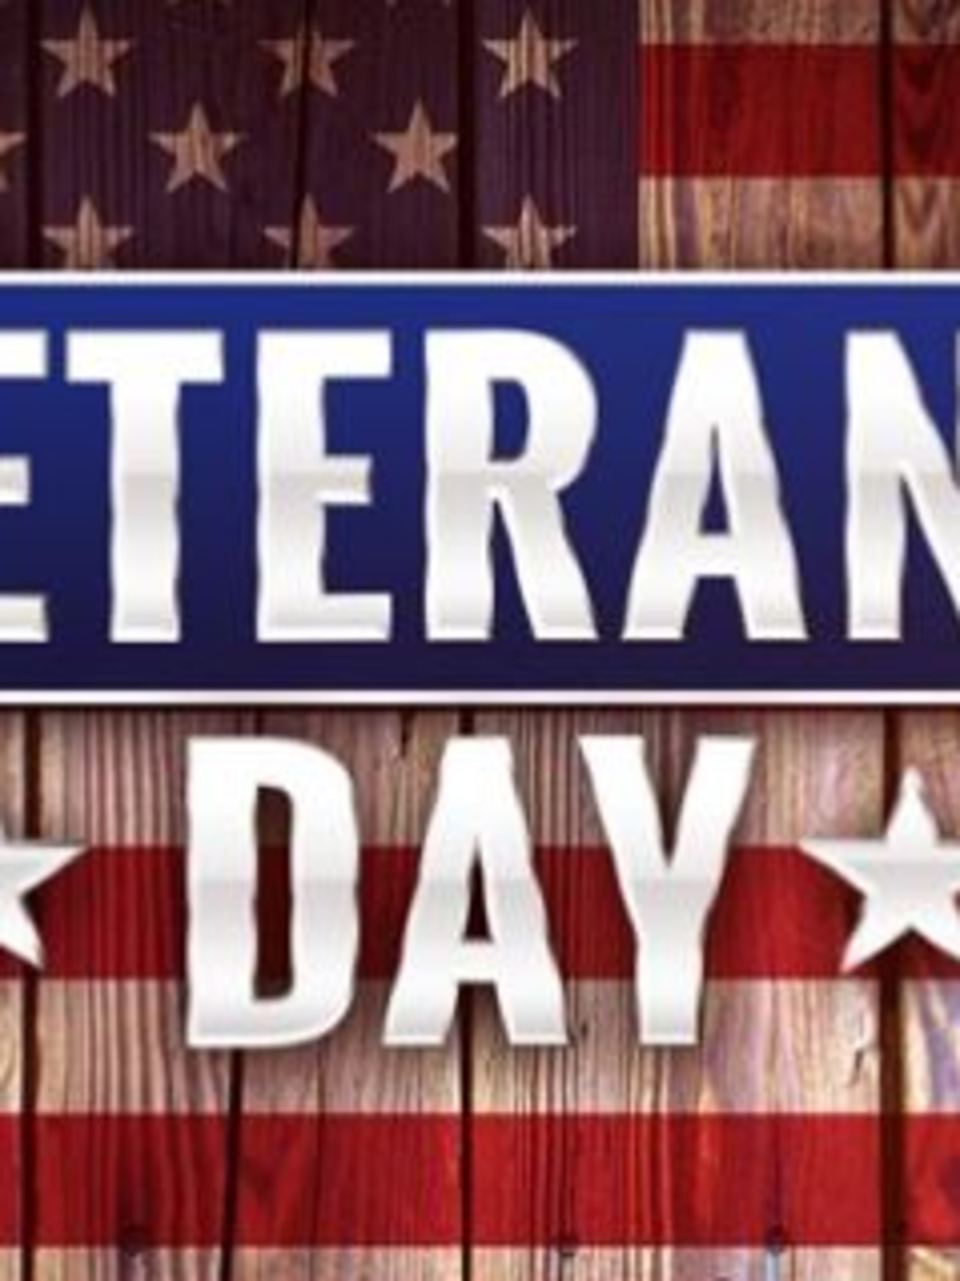 Food Deals And Discounts For Veterans On This Veterans Days Wstm